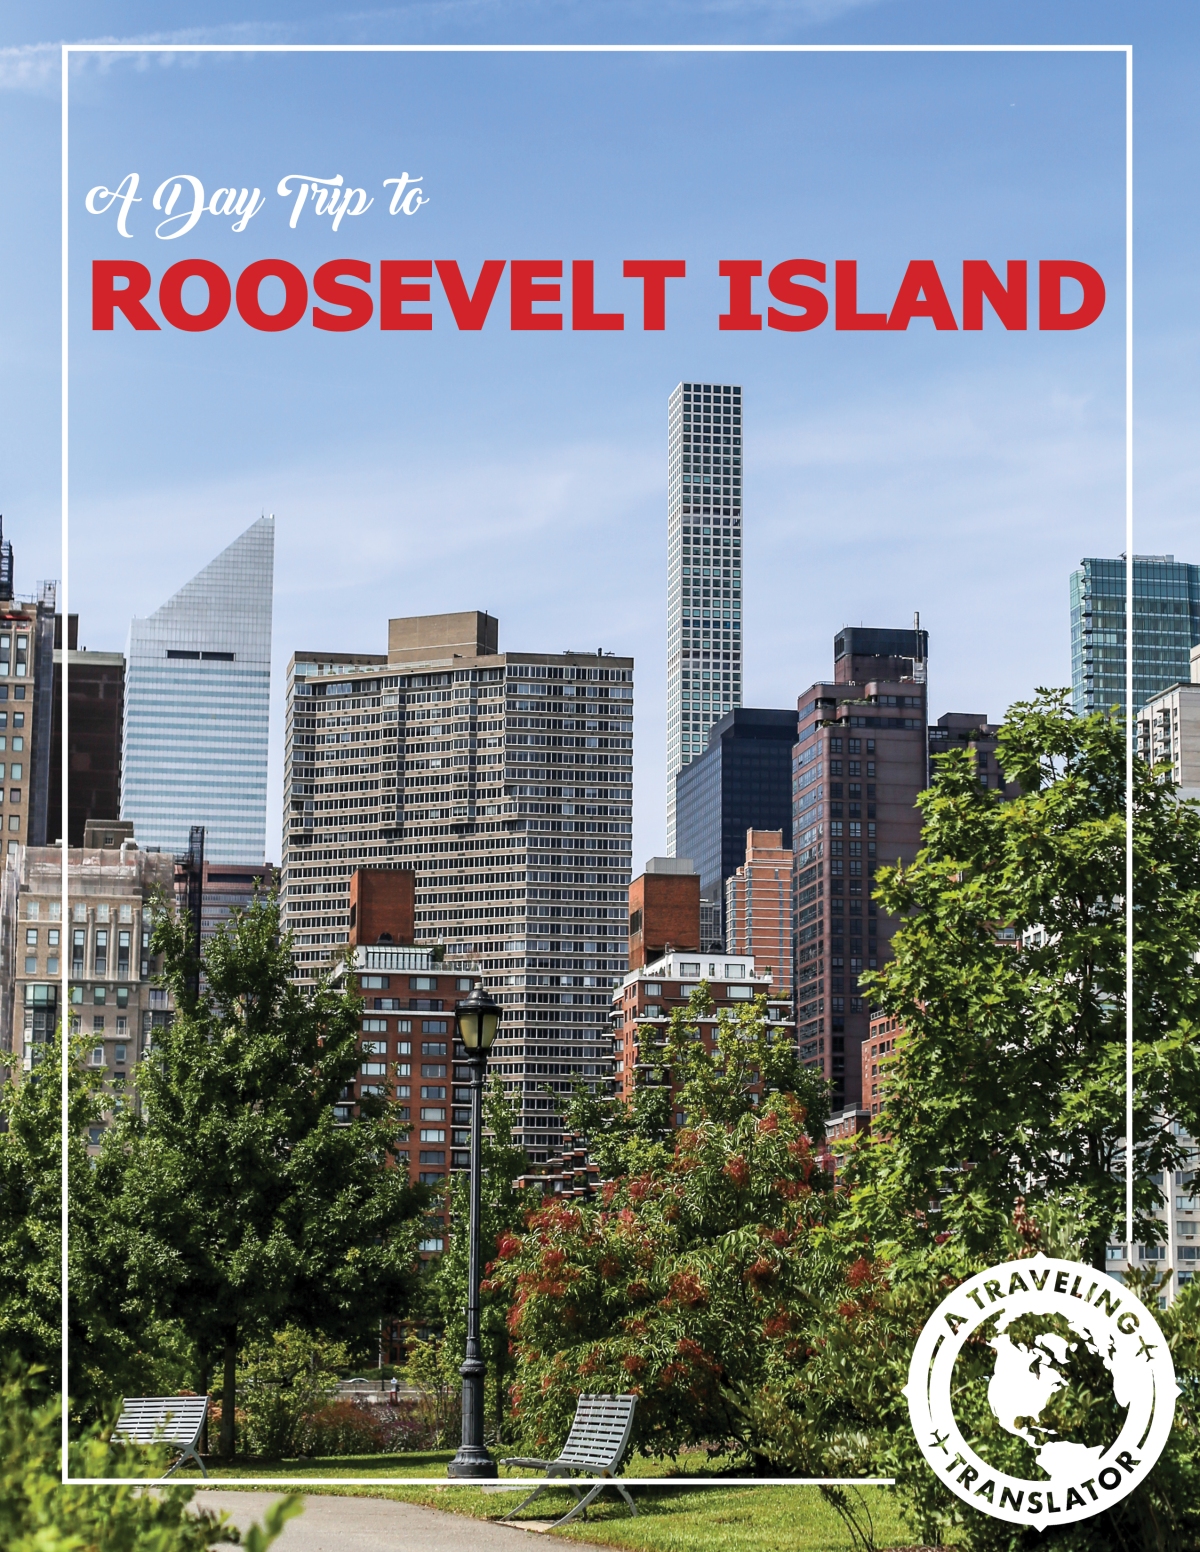 A Day Trip to Roosevelt Island